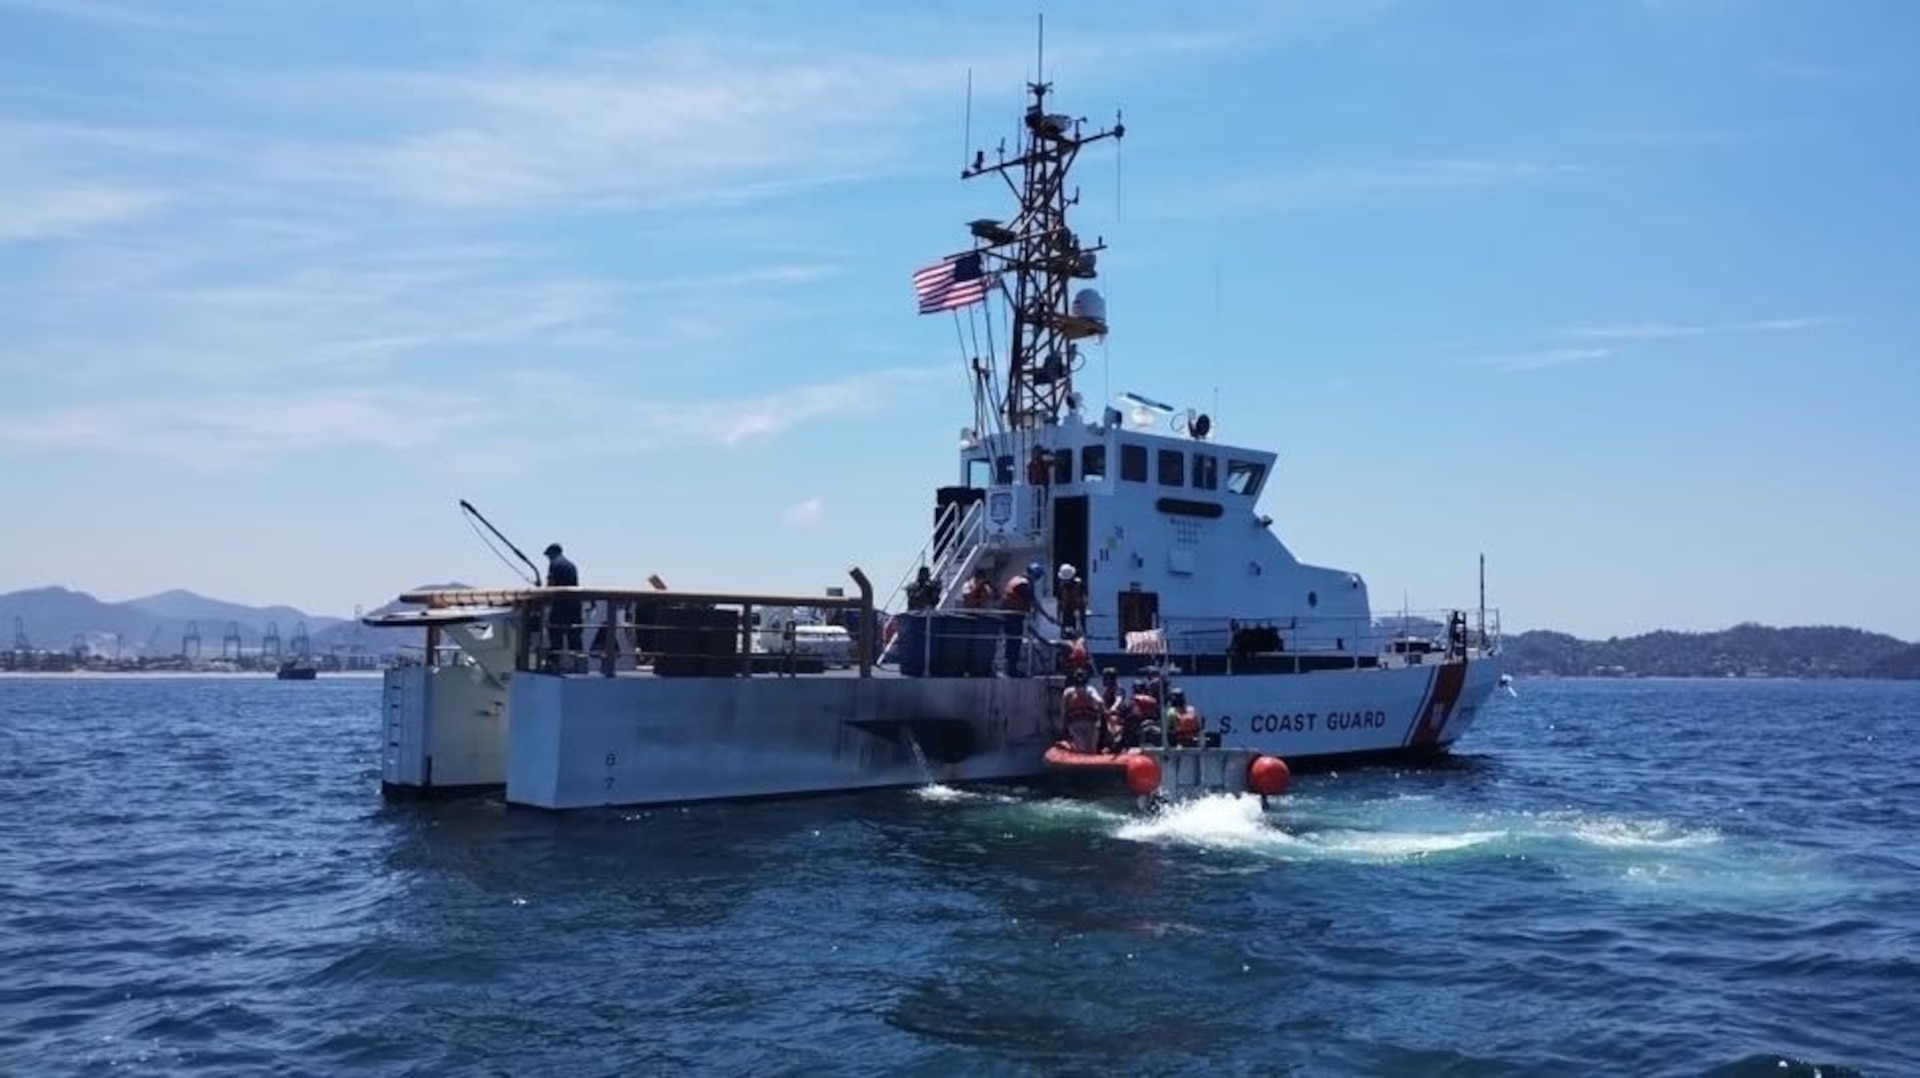 The U.S. Coast Guard Cutter Blackfin - WPB 87317, homeported in San Pedro, Calif., gets underway from a pier in Manzanillo, Mexico as part of a search and rescue exercise, April 30, 2024. Secretaría de Marina (SEMAR) hosted the international exercise in efforts to improve interoperability and to share best practices in search and rescue. (U.S. Coast Guard courtesy photo/released)